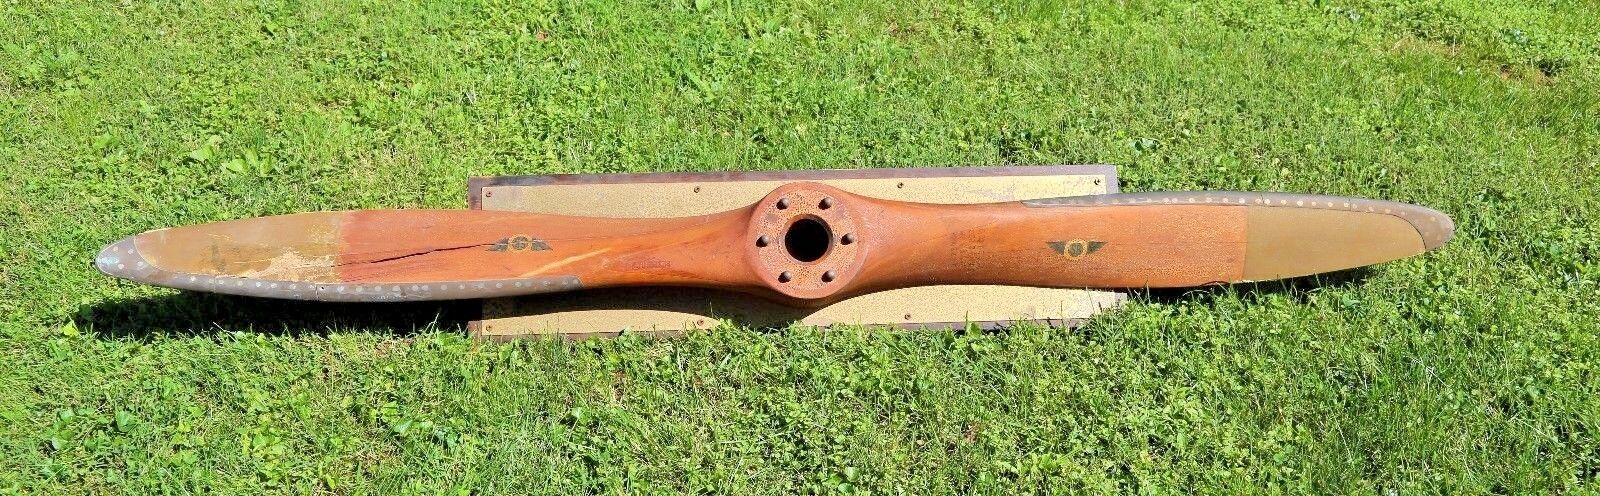 Mounted Vintage Sensenich Wooden Propeller from WW2 time period